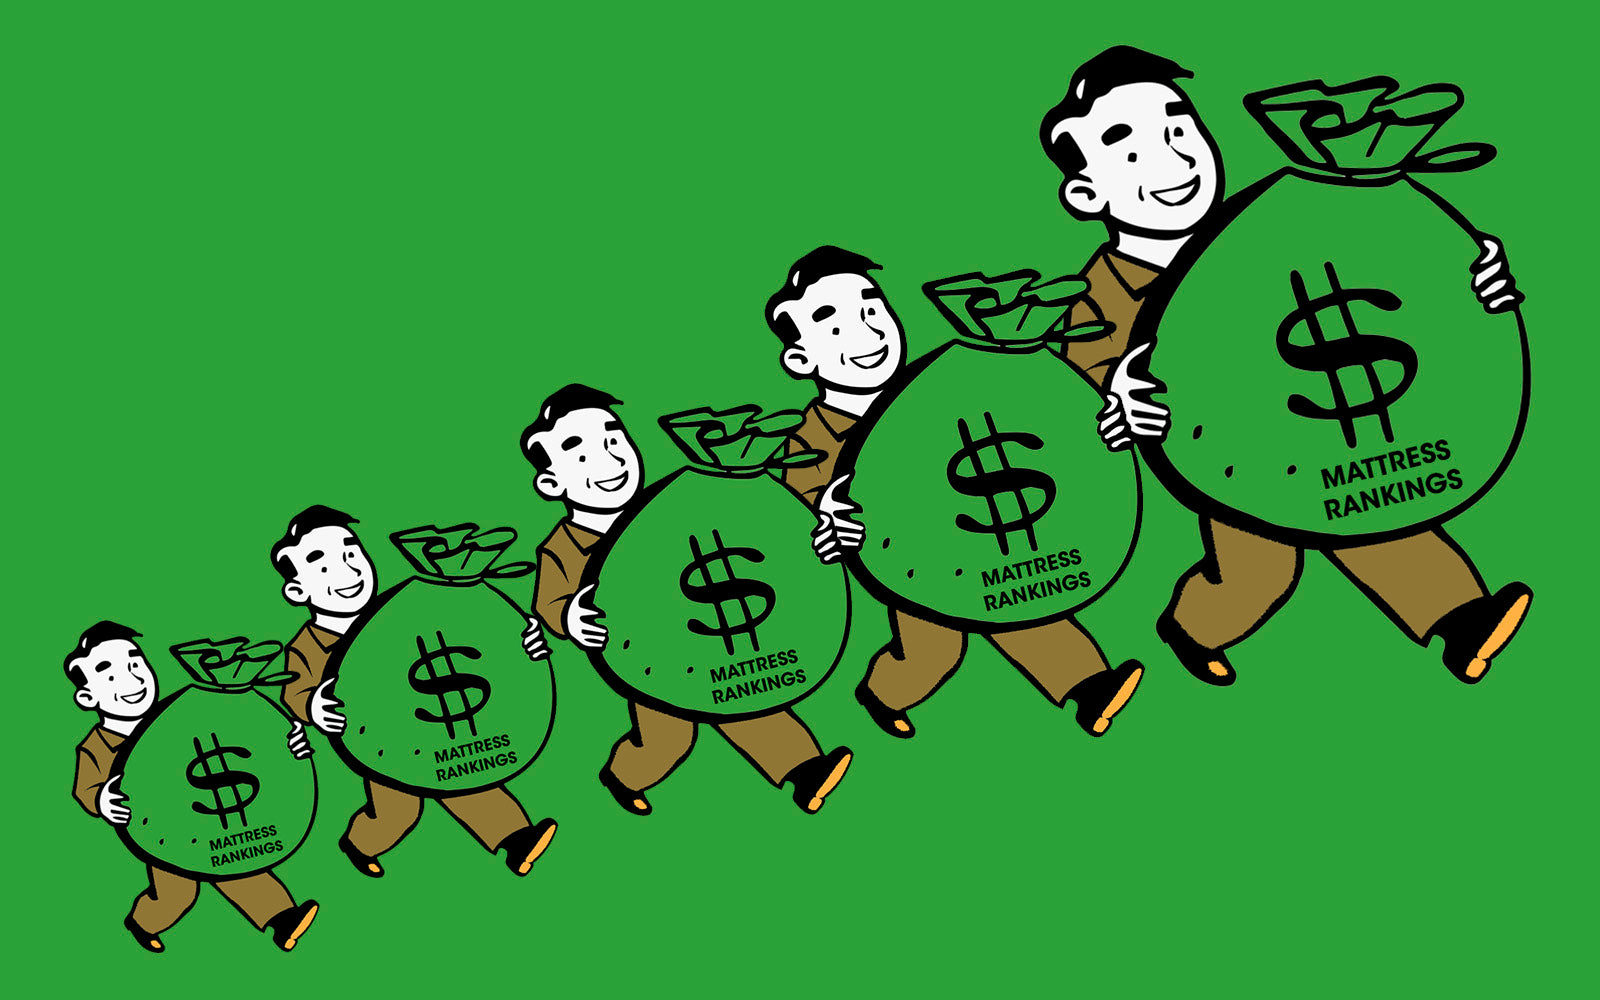 Illustration of a business men carrying the bags of money they collect from mattress manufacturers for ranking their mattresses higher on their various ranking list 